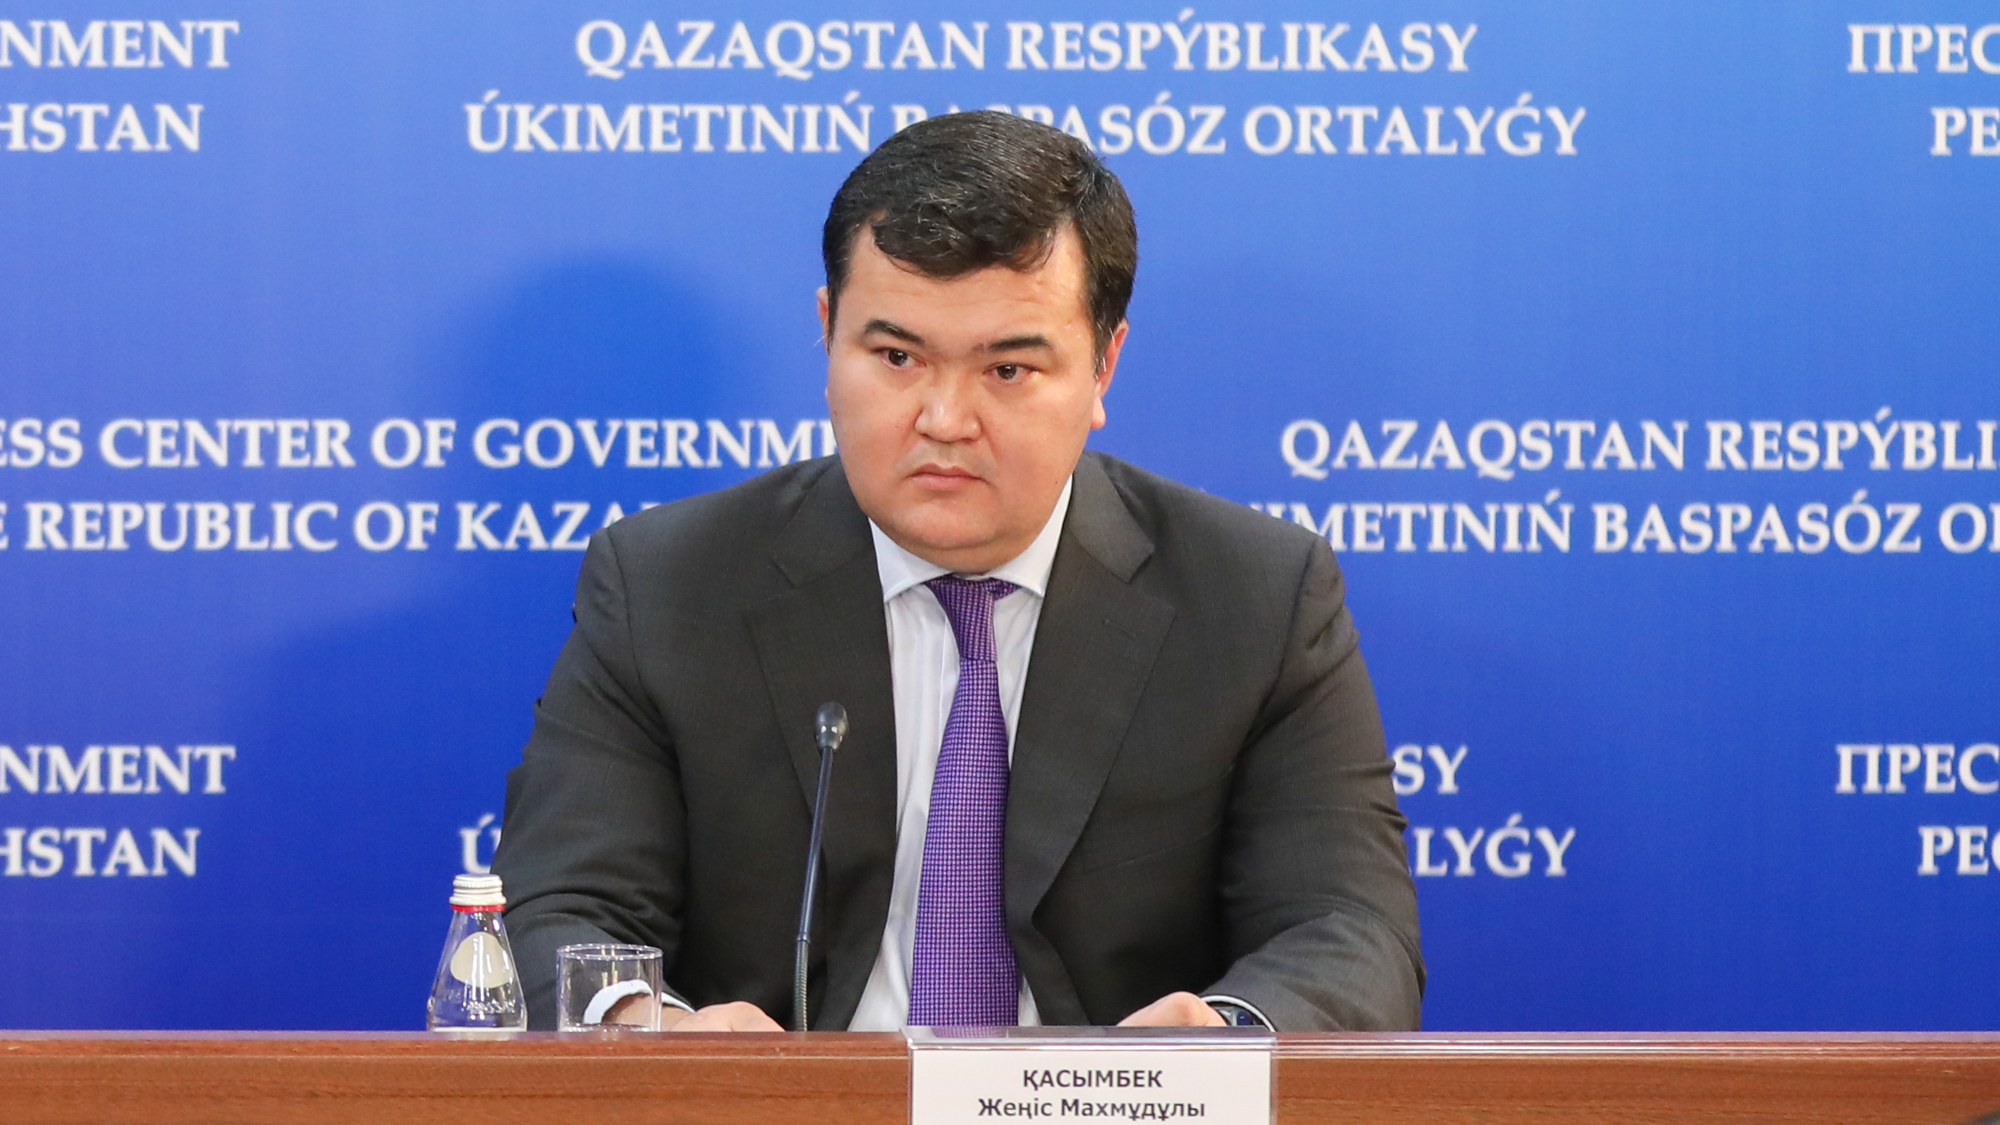 $330 billion of foreign investment attracted for the period of Kazakhstan’s independence